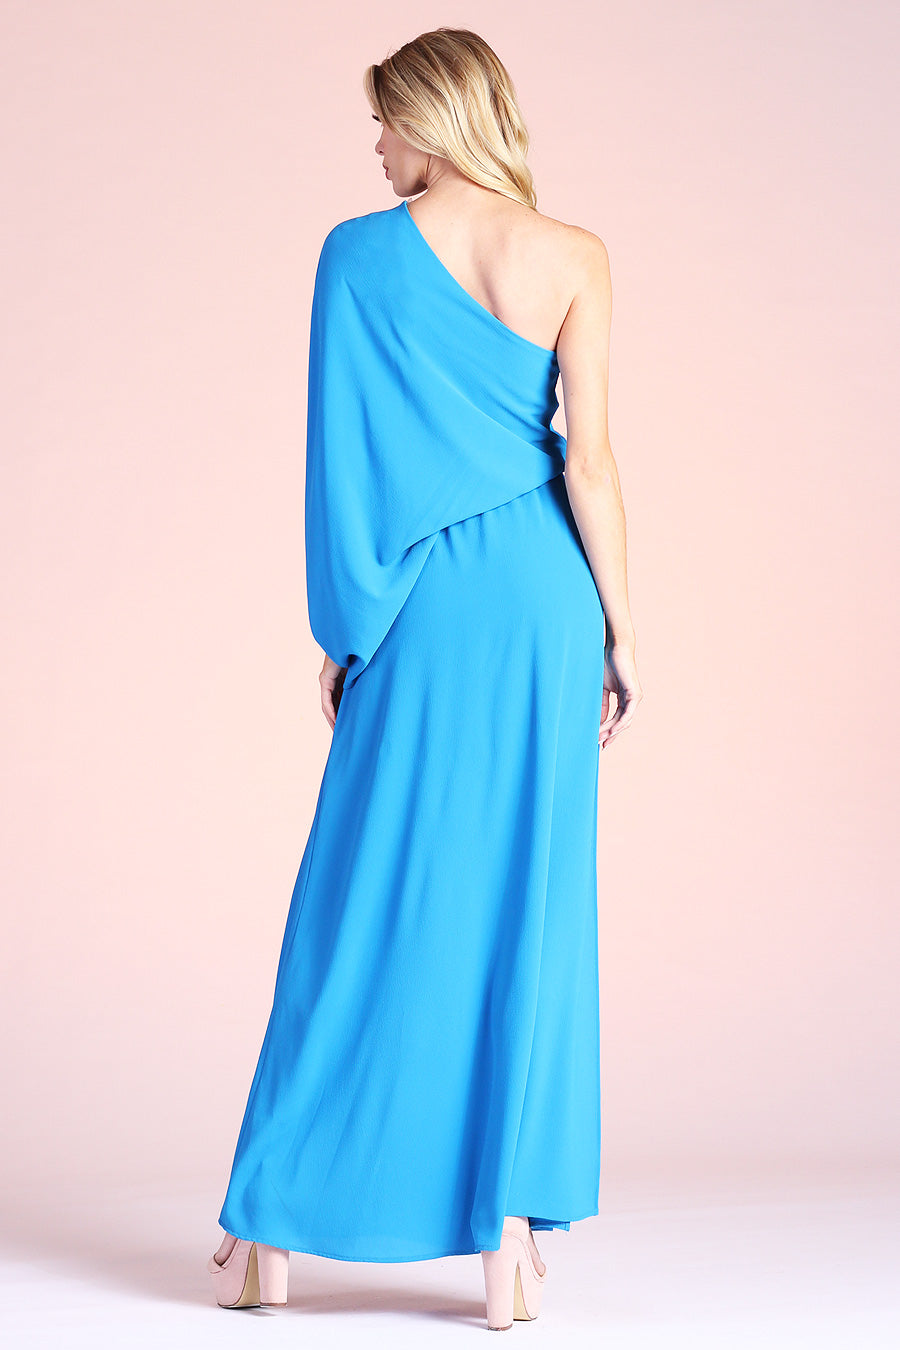 Slouchy One Shoulder Maxi Dress